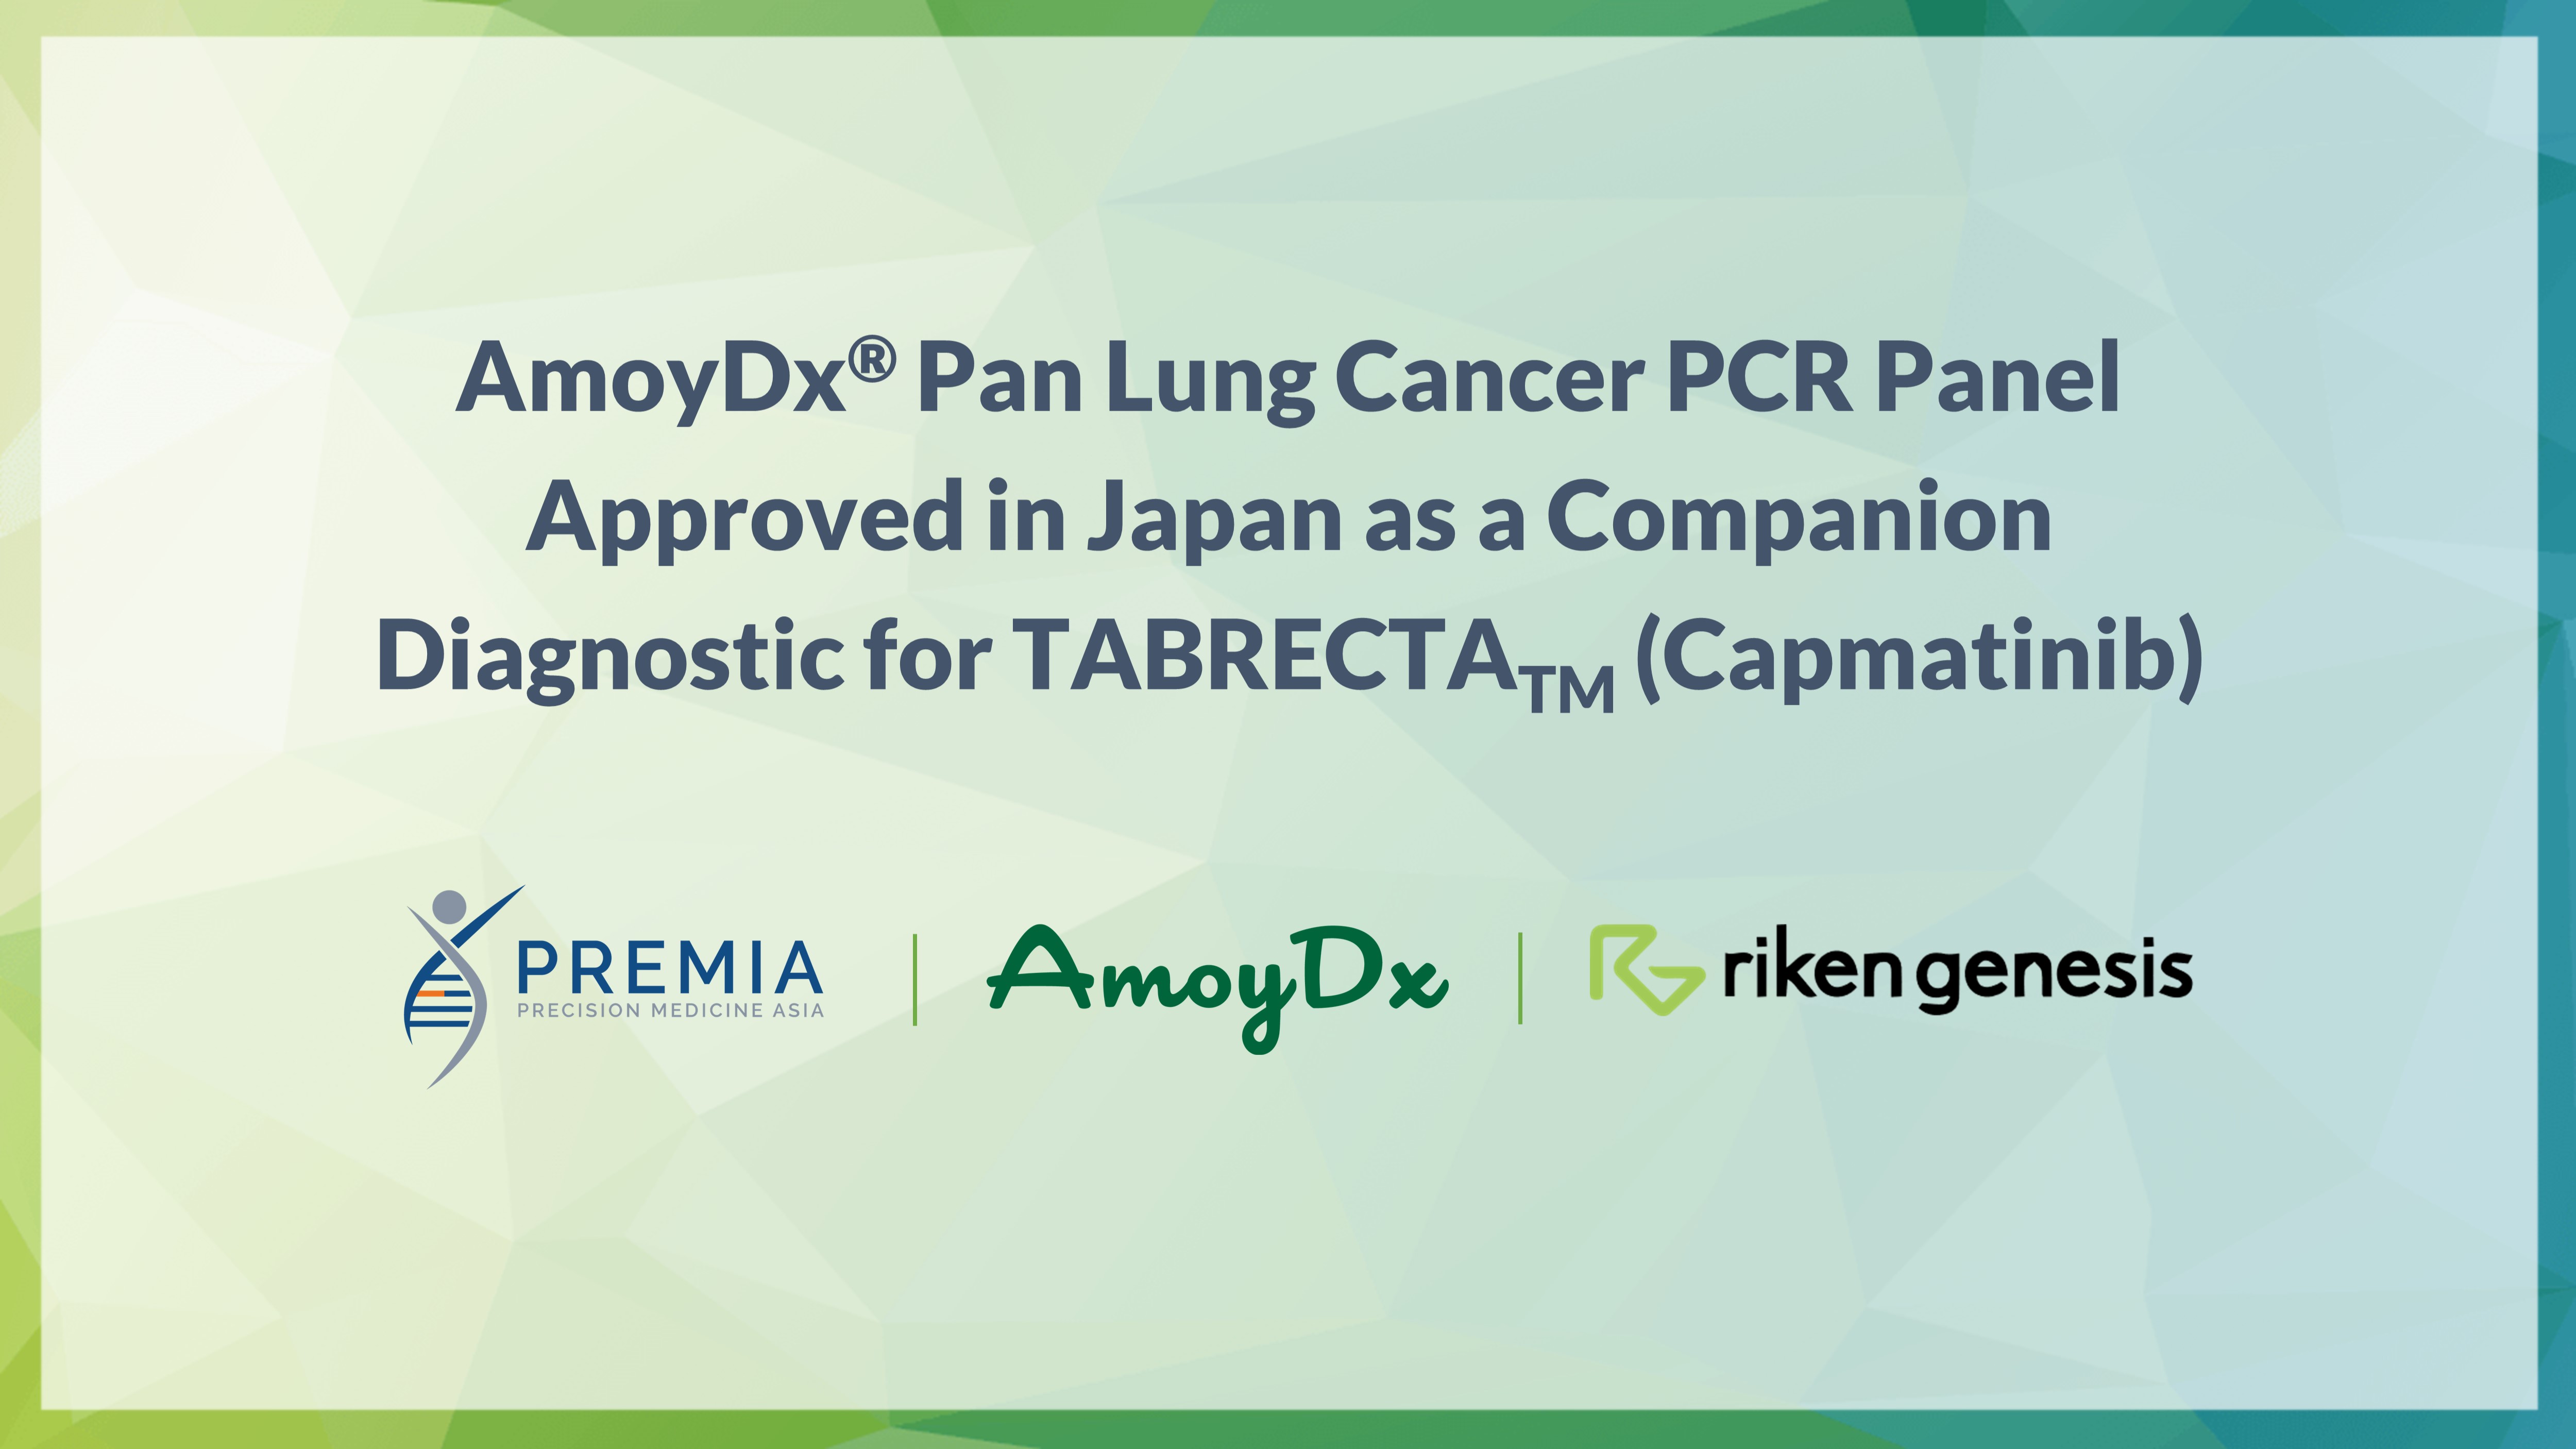 AmoyDx® Pan Lung Cancer PCR Panel 
Approved in Japan as a Companion Diagnostic 
for TABRECTA (Capmatinib)